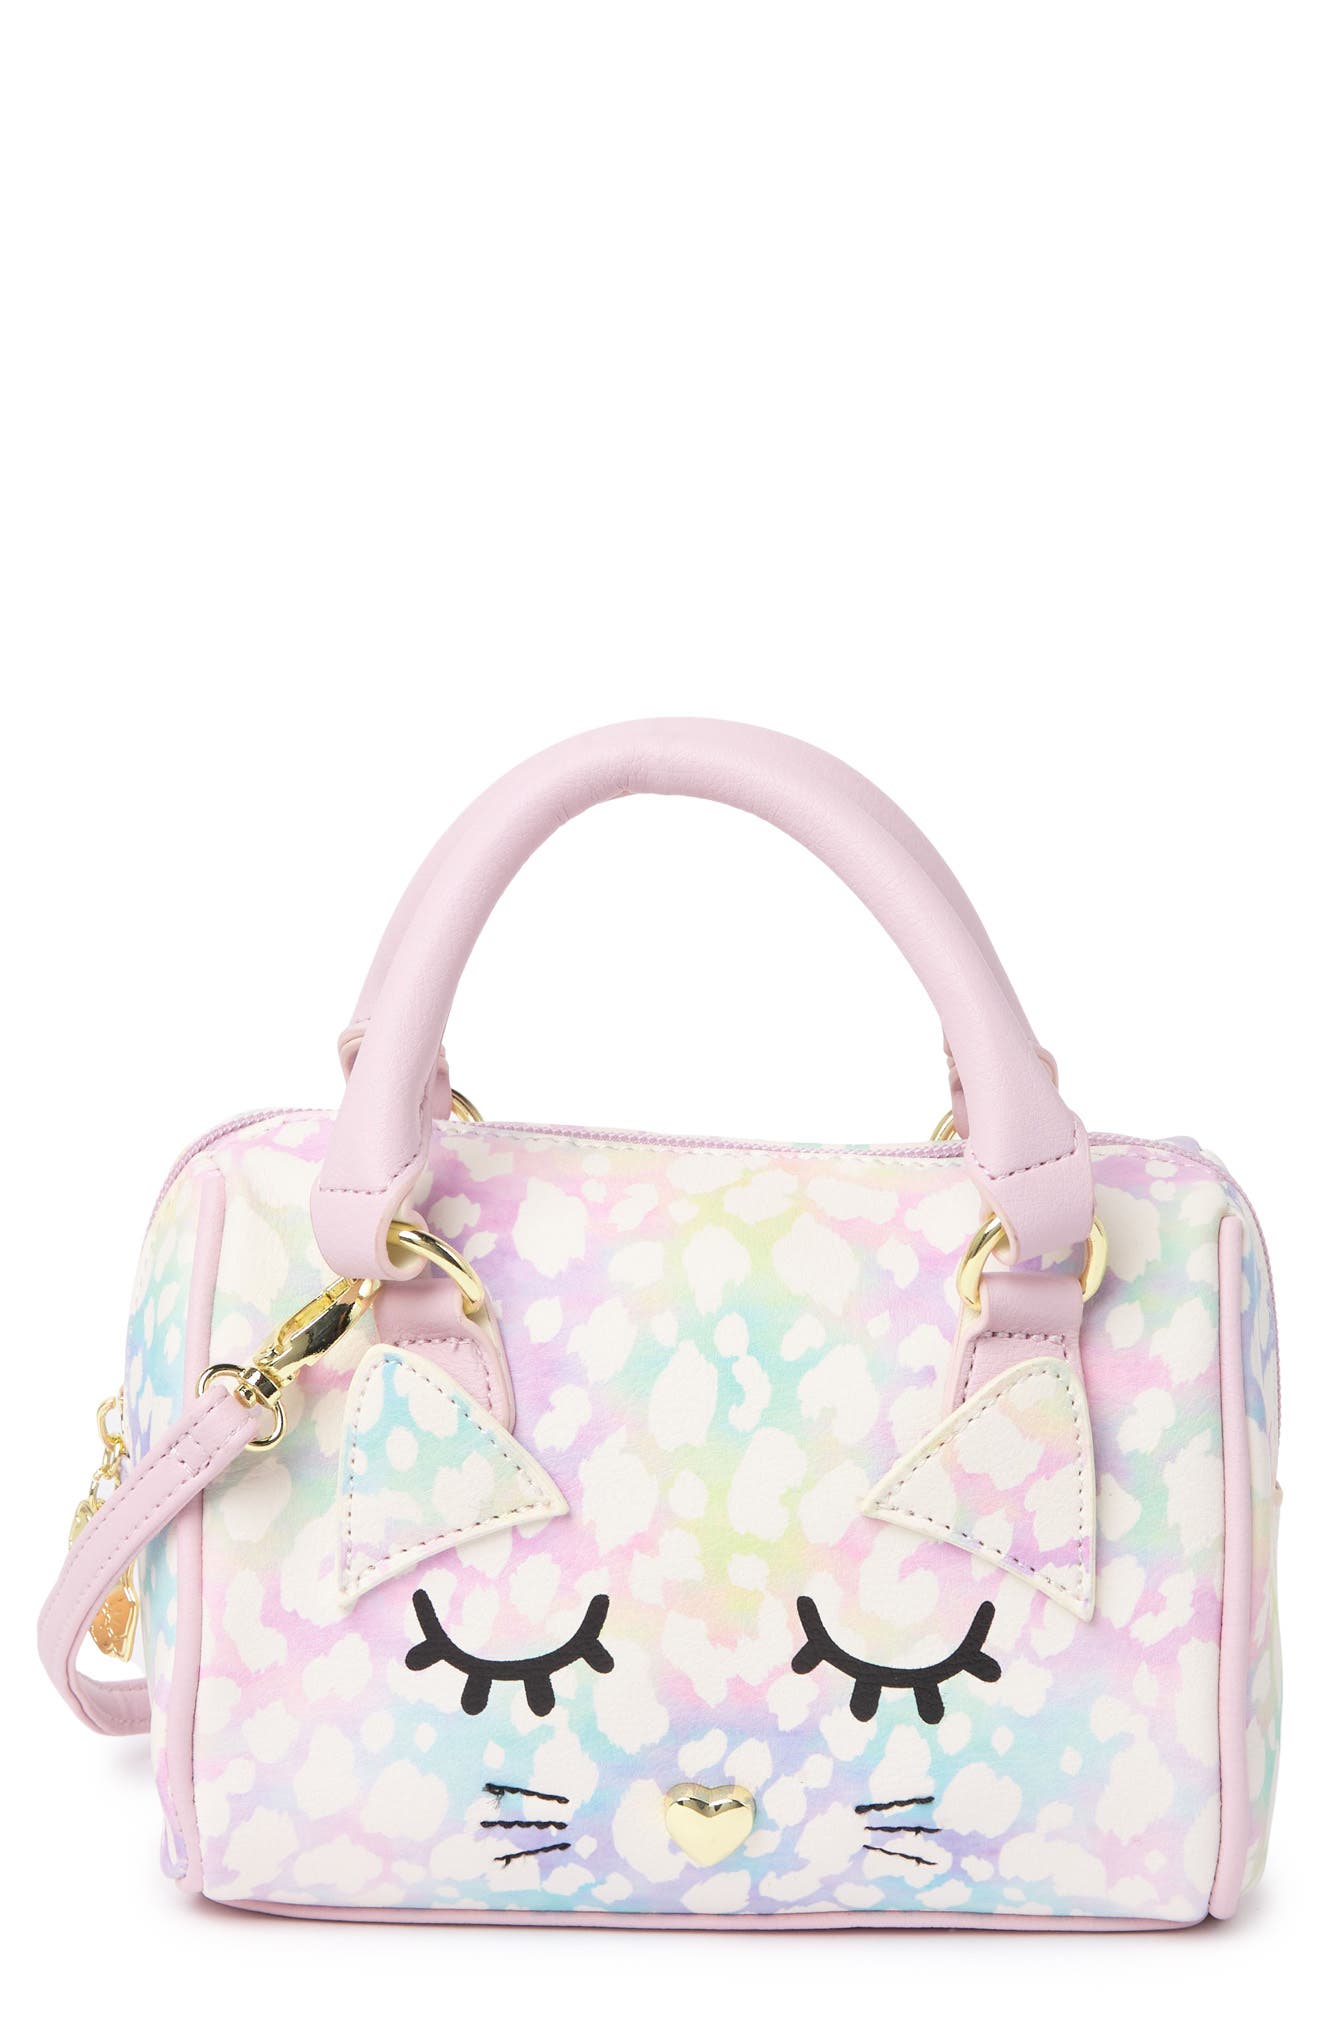 Luv Betsey By Betsey Johnson Harley Mini Barrel Bag In Pink Multi ...